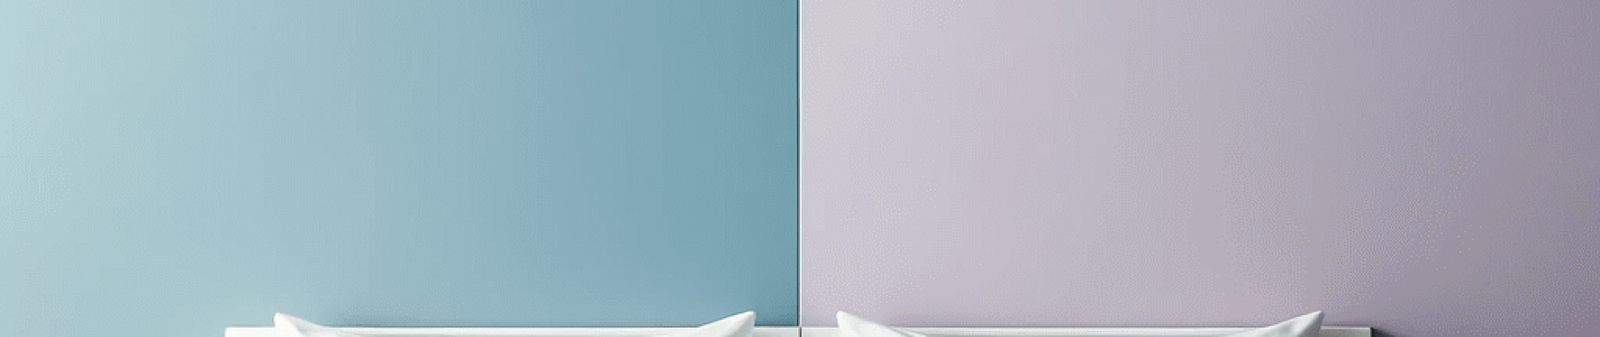 Two Colour Combination For Bedroom Walls - Image Showing A Bedroom Wall With A Seamless Blend Of Two Colours: Soothing Sky Blue On The Left And Gentle Lavender On The Right.